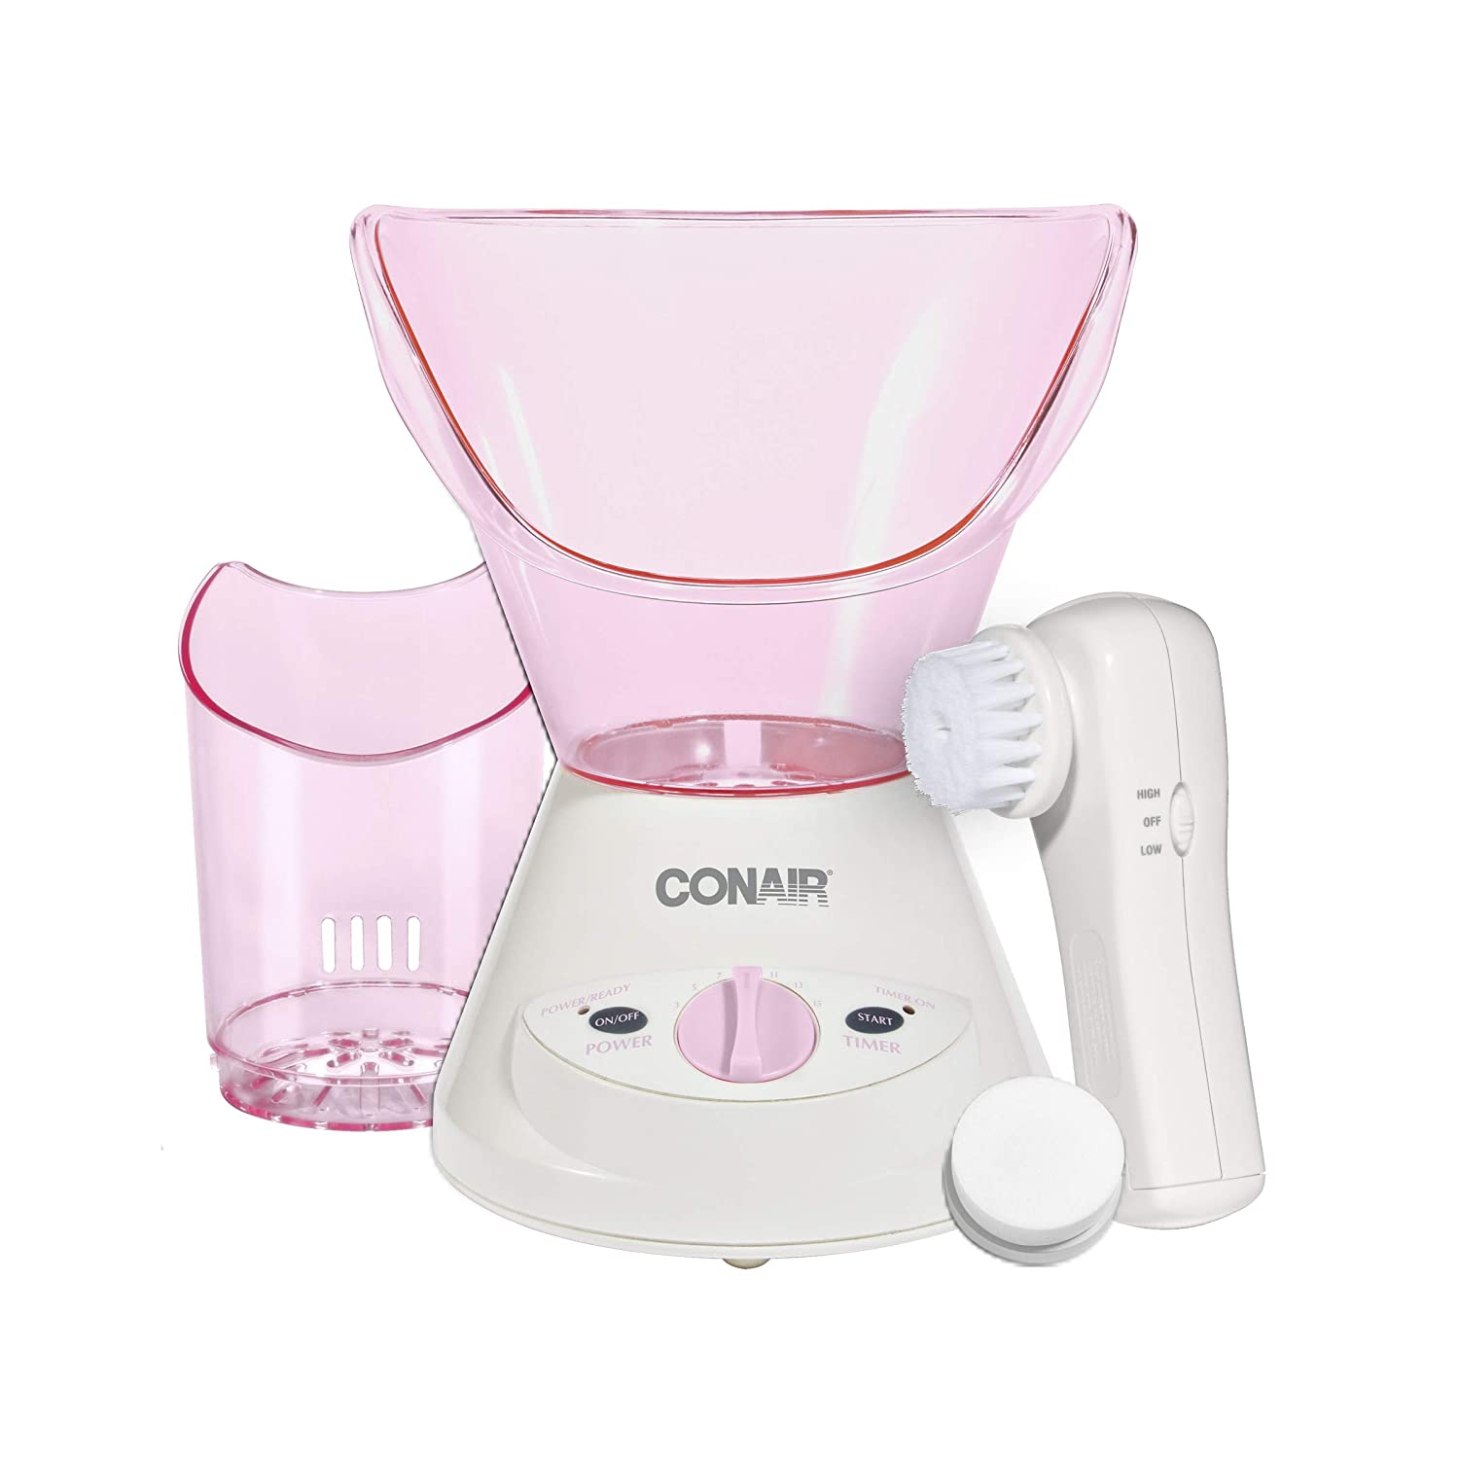 A pink conair facial steamer with an included facial cleansing brush and nasal steamer